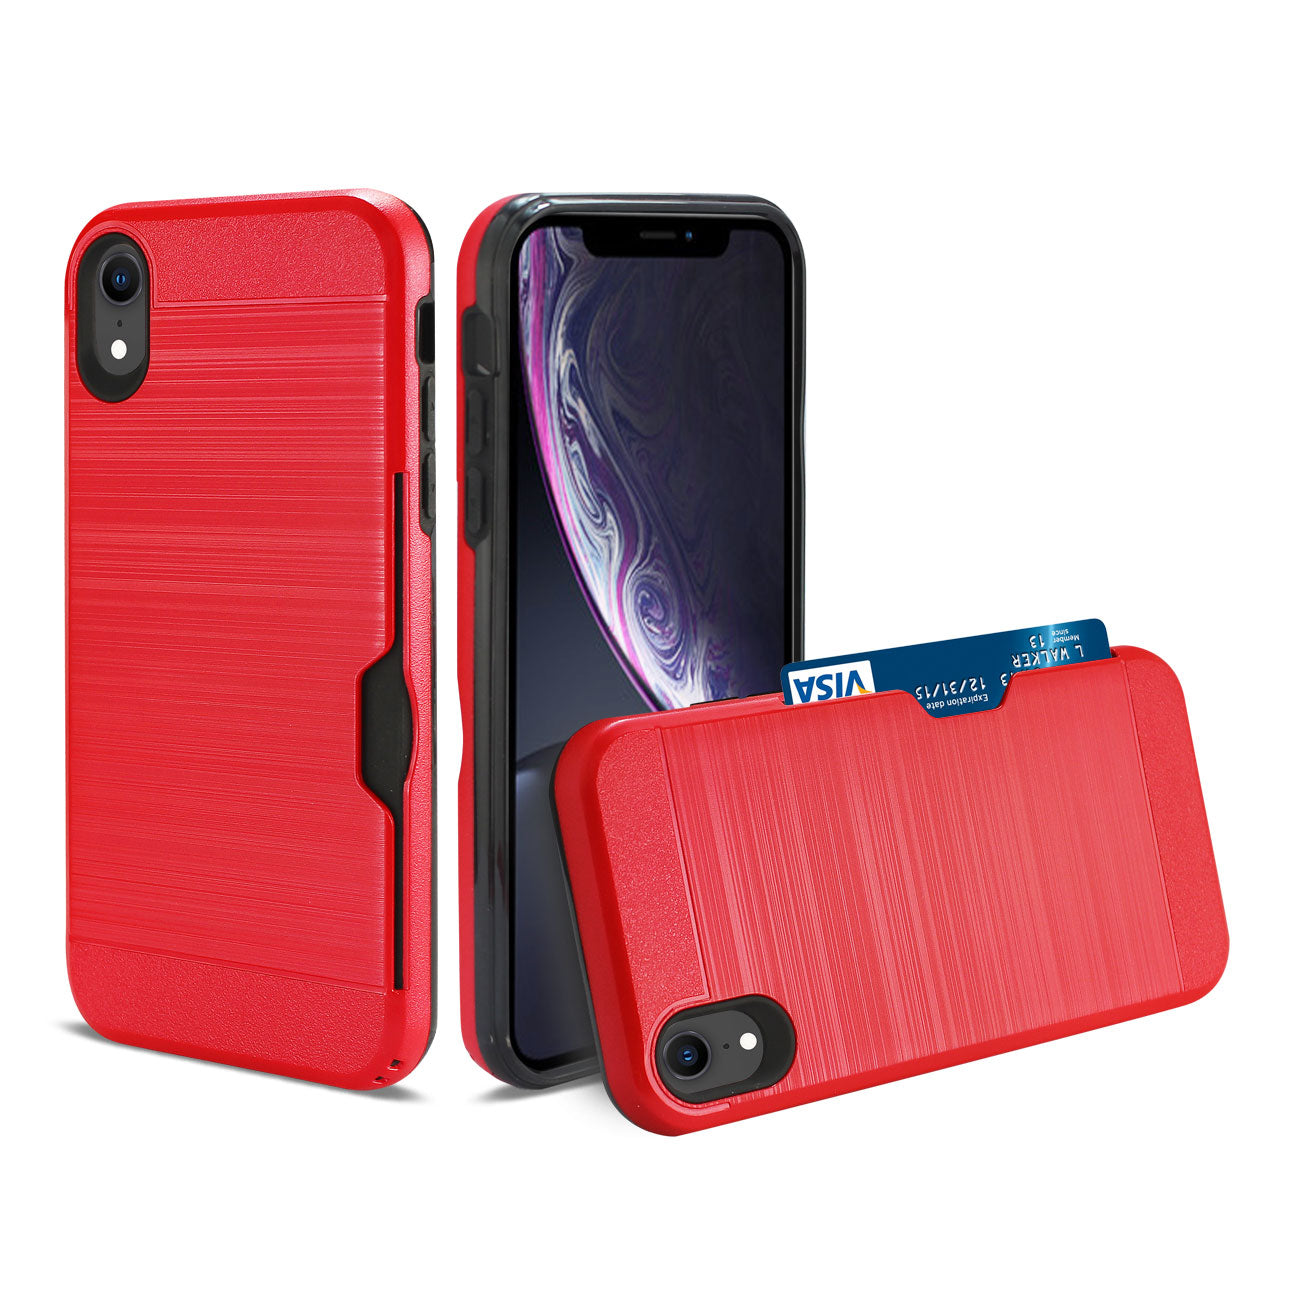 iPhone XS Max Slim Armor Hybrid Case With Card Holder In Red